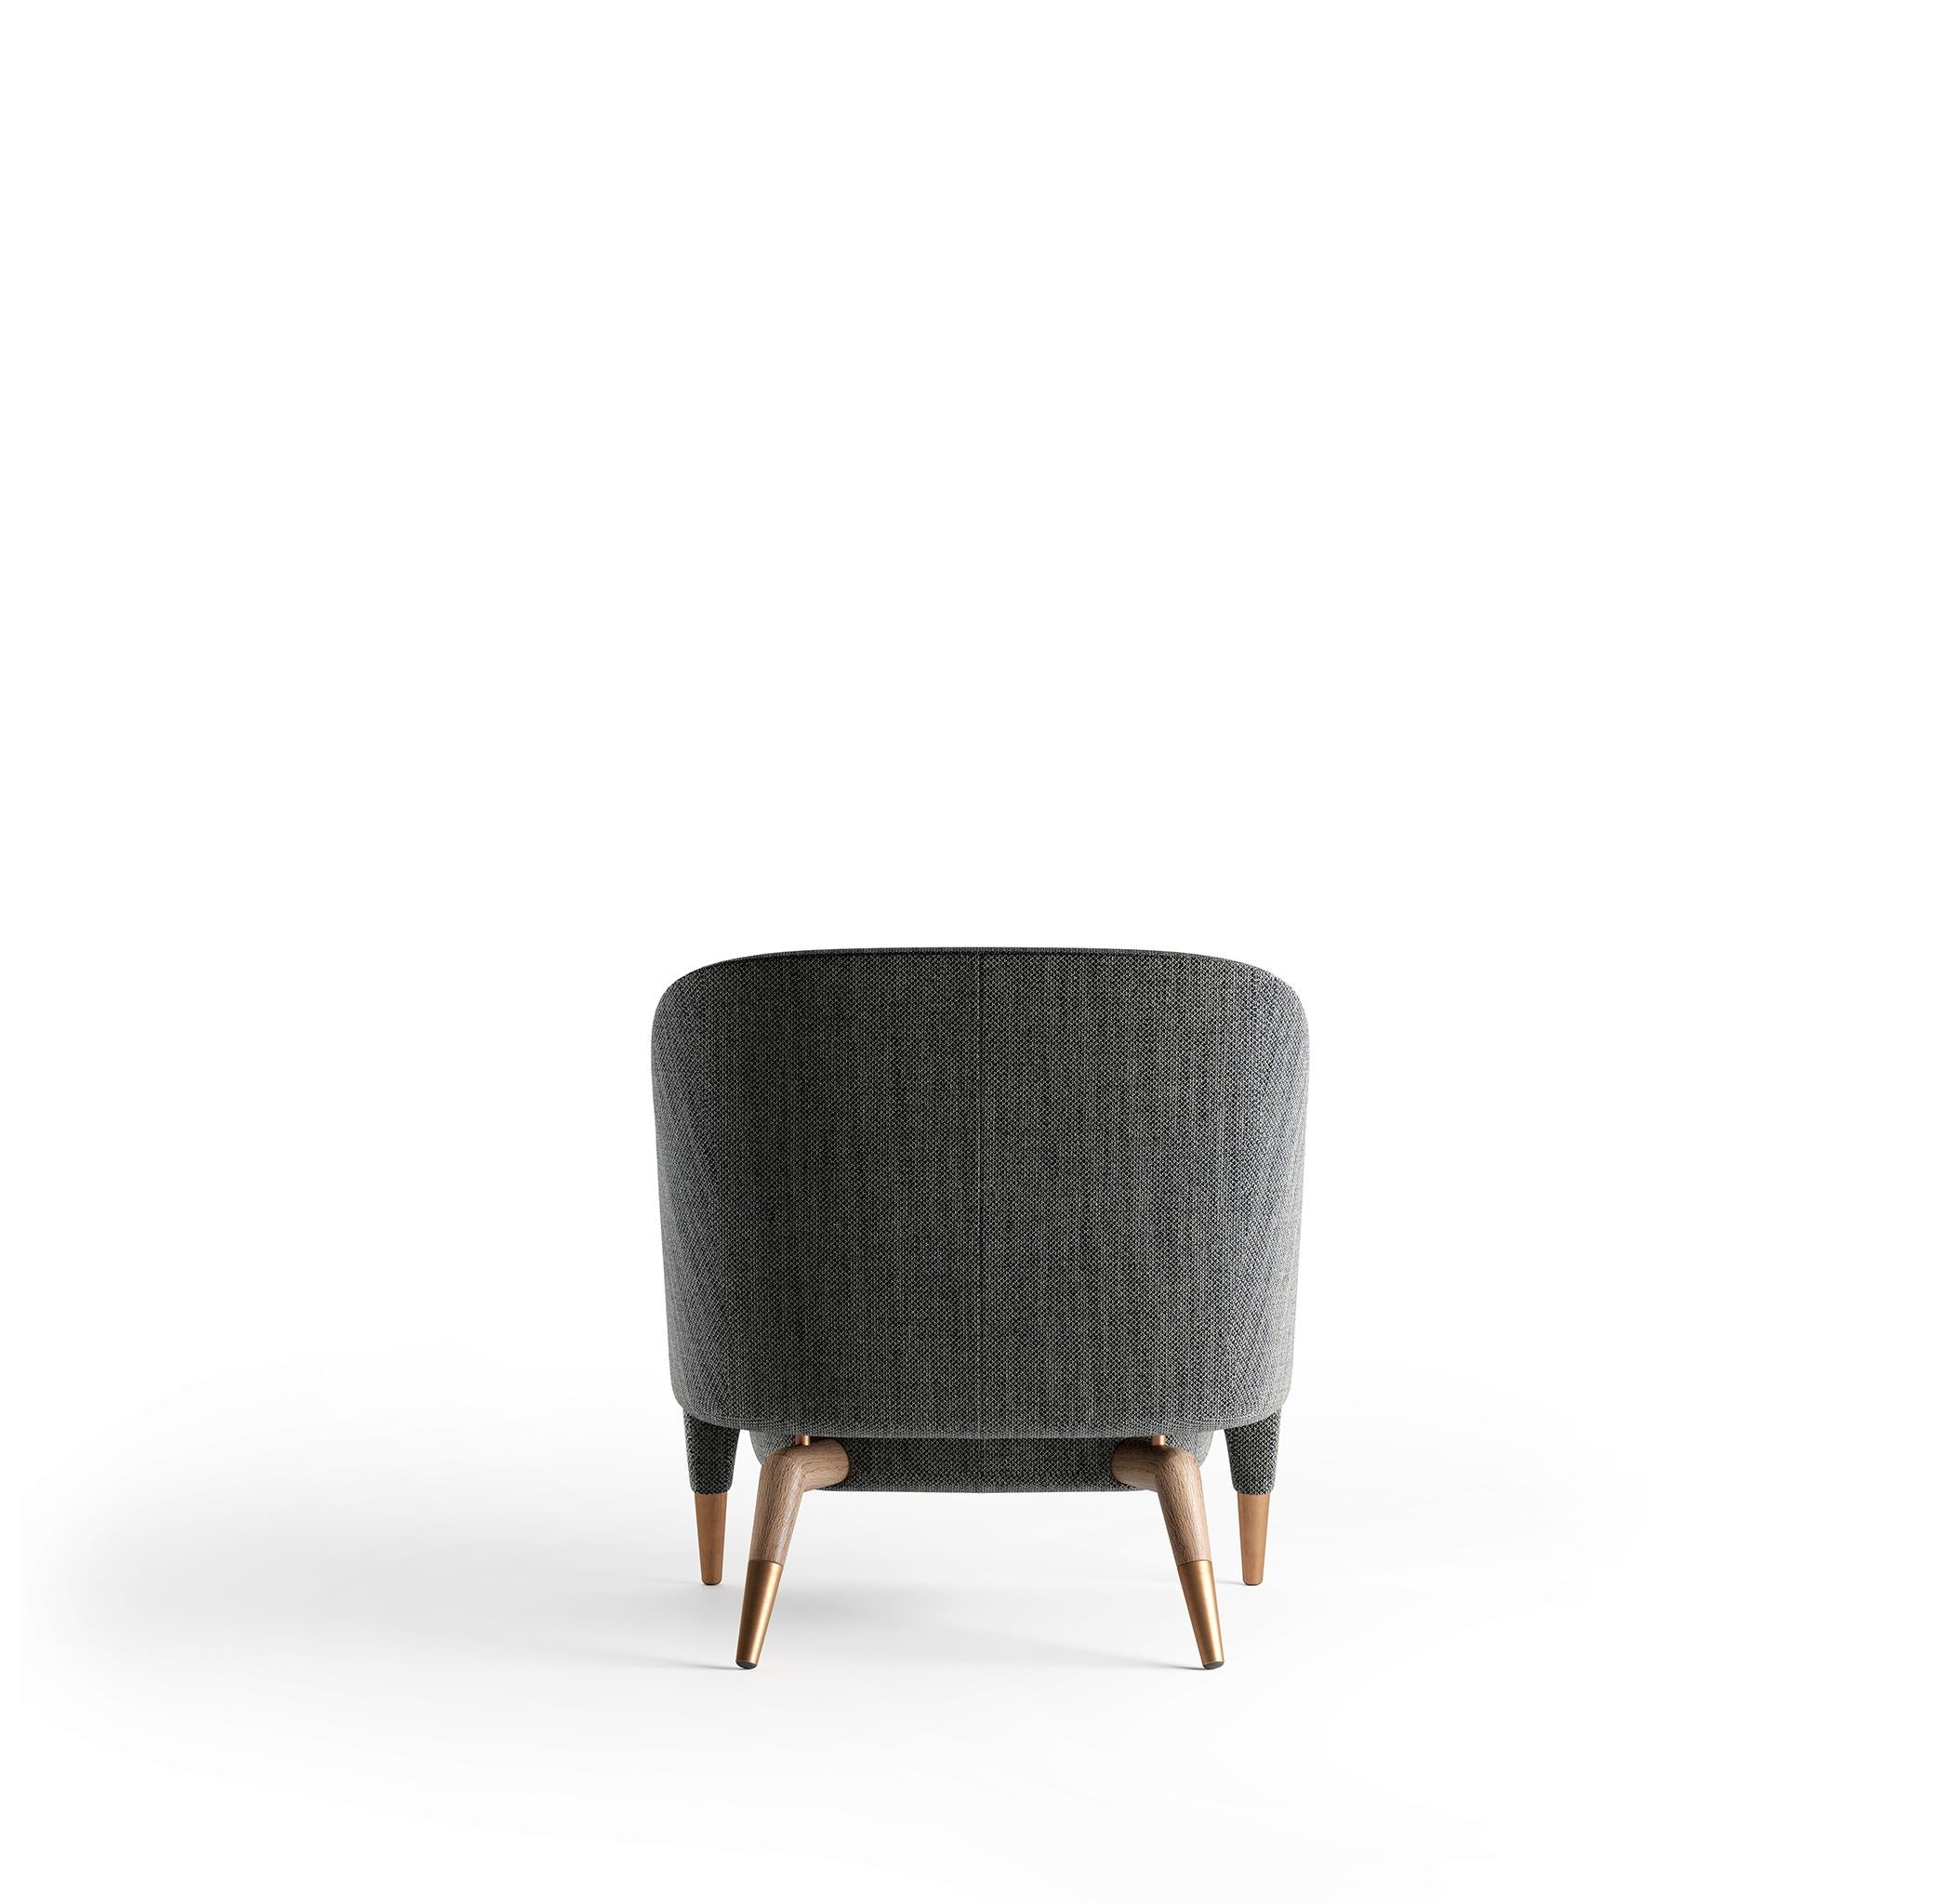 Modern  Greywear Linen Armchair Molteni&C by Gio Ponti Design D.151.4, Made in Italy For Sale